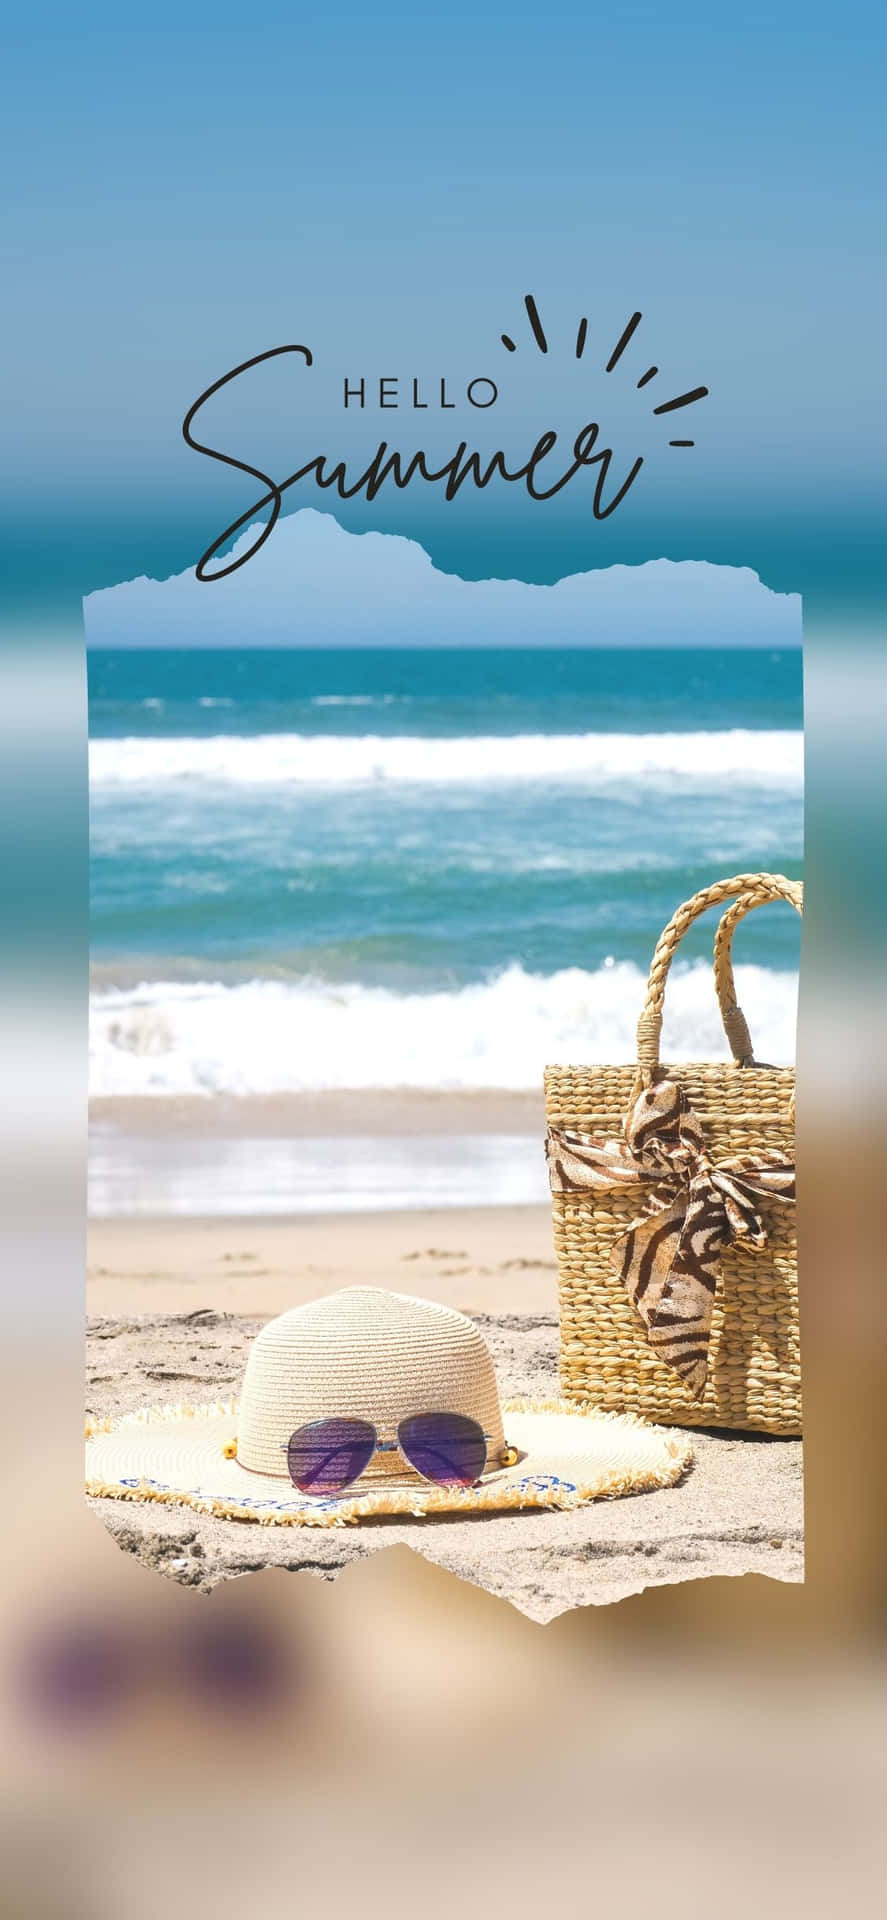 100+] Iphone X Summer Background s | Wallpapers.com